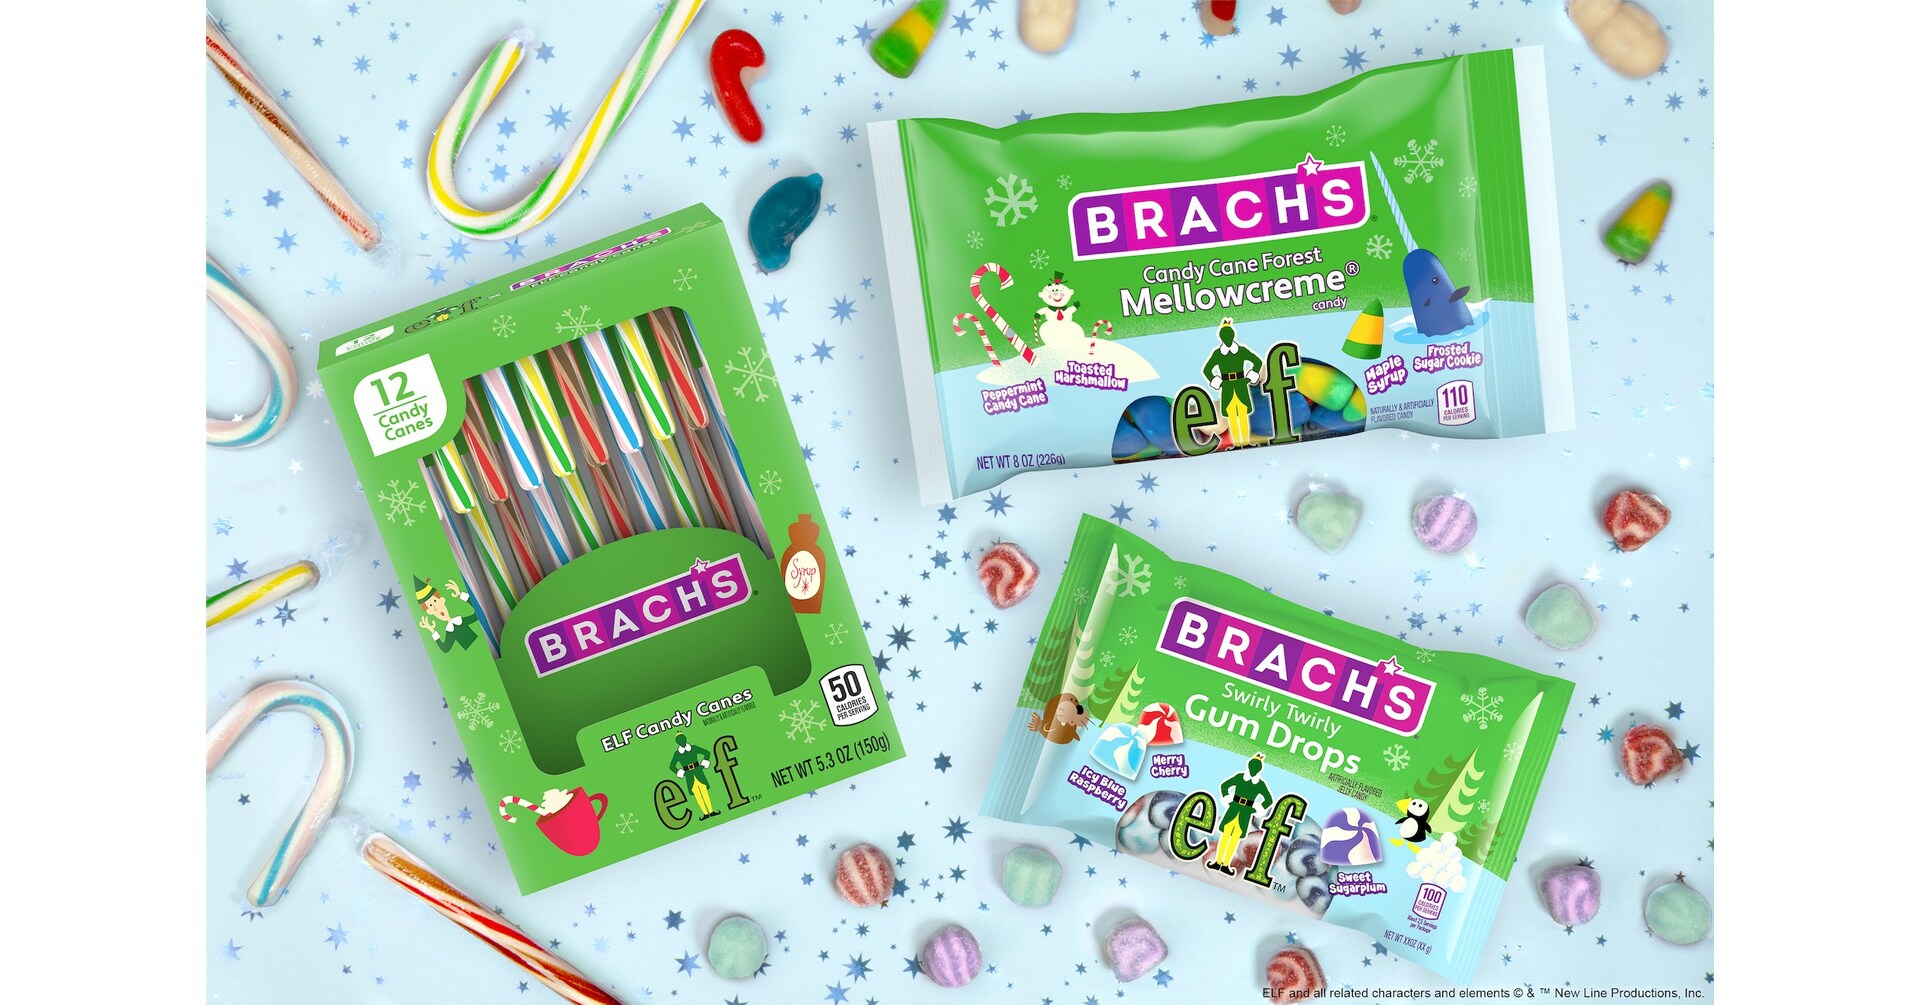 The Best Way to Spread Holiday Cheer is with BRACH'S® New ELF